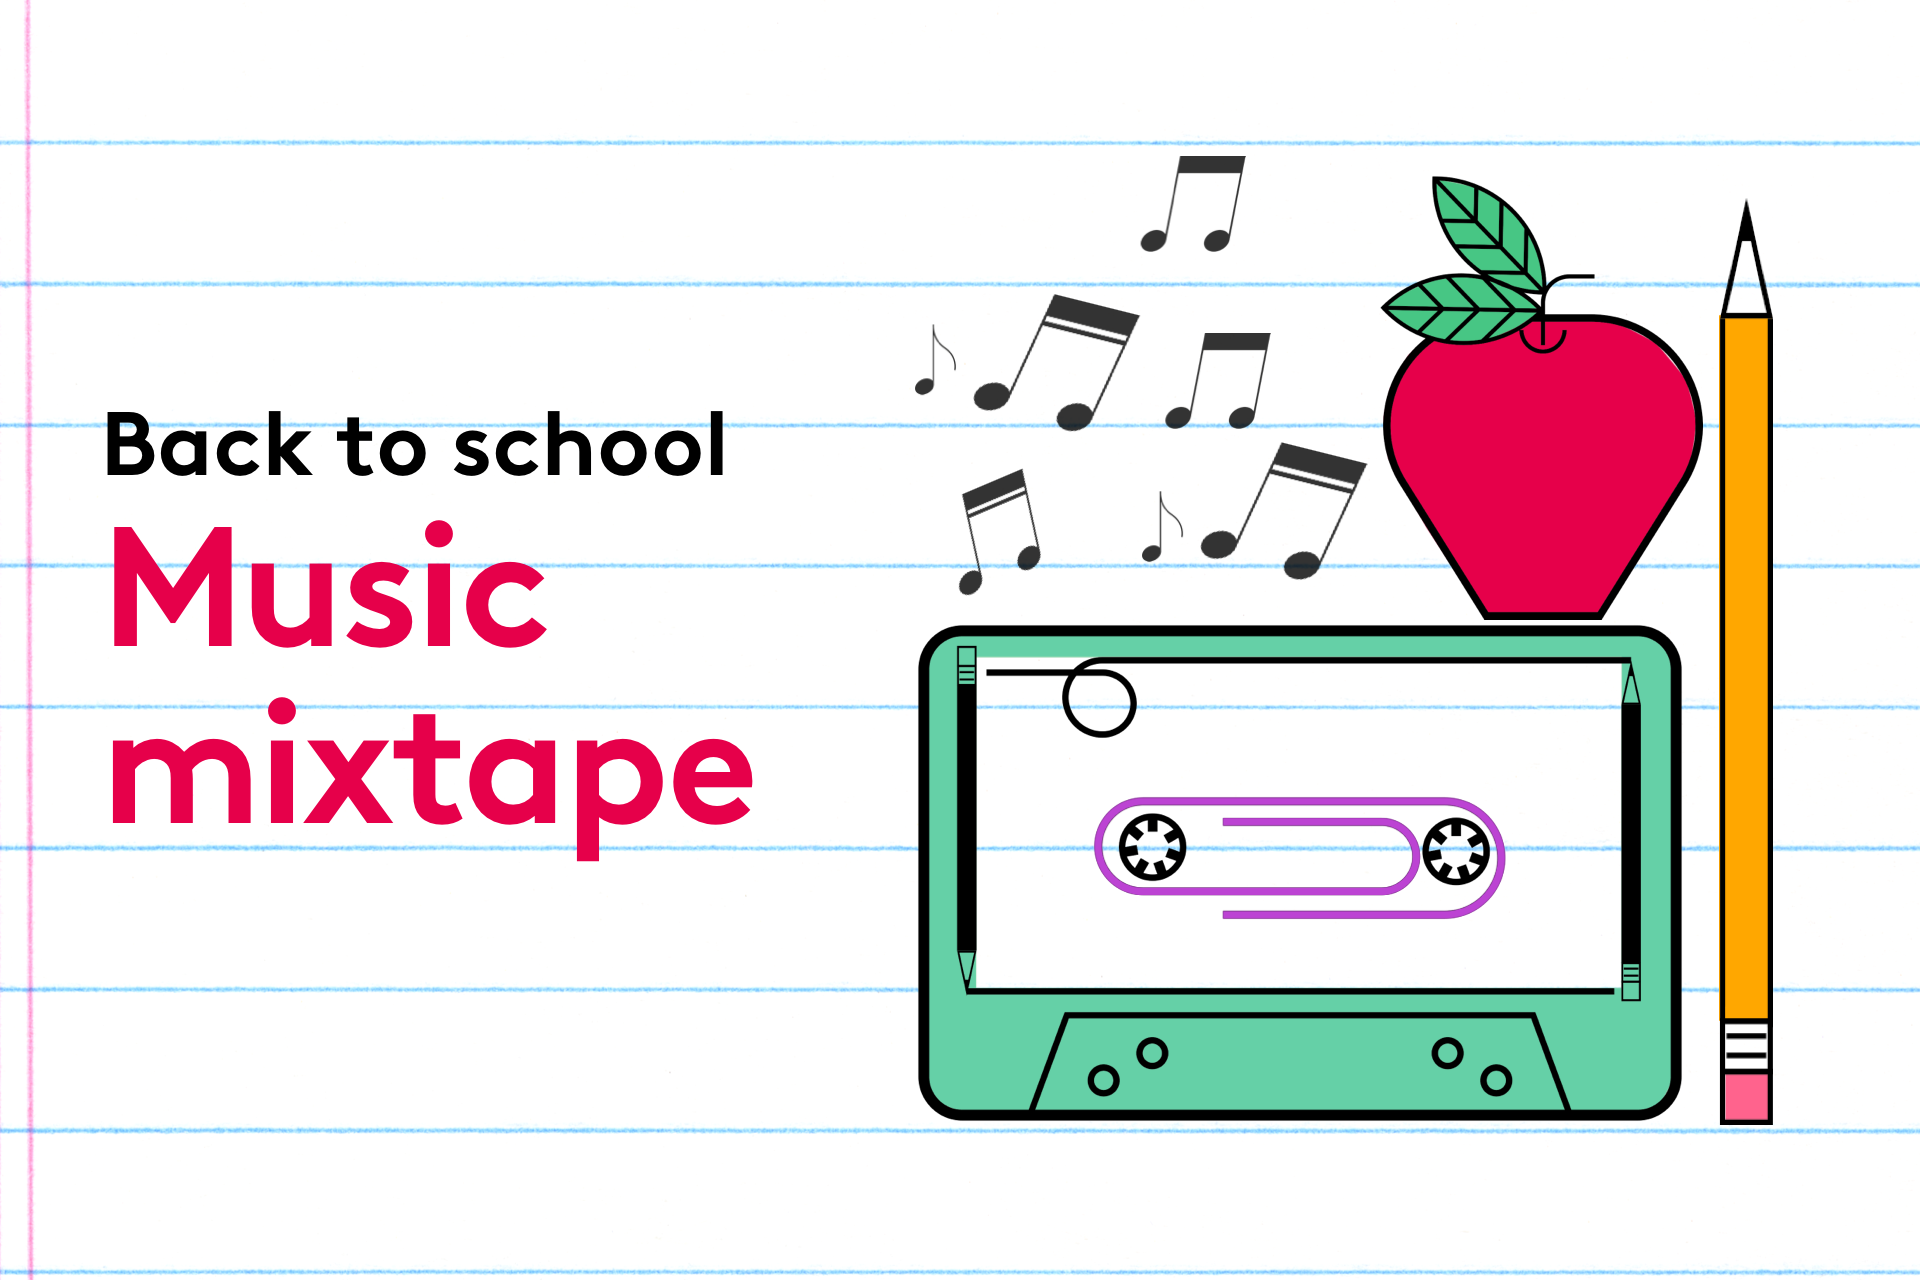 Back_to_School_Music_mixtape_3x2.png